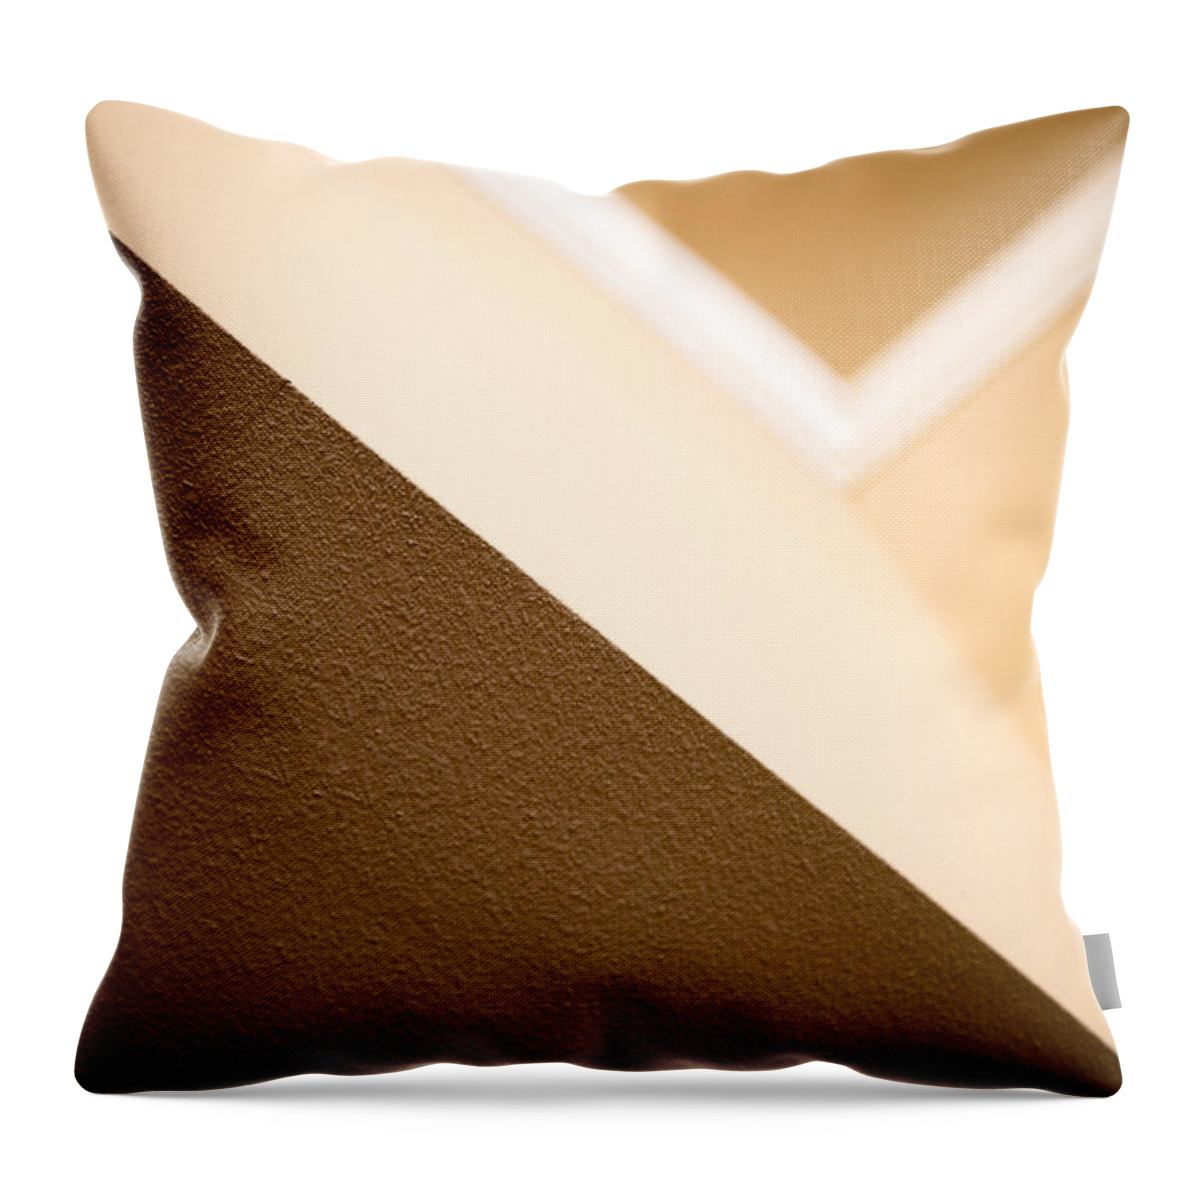 Art Throw Pillow featuring the photograph Angles by Darryl Dalton